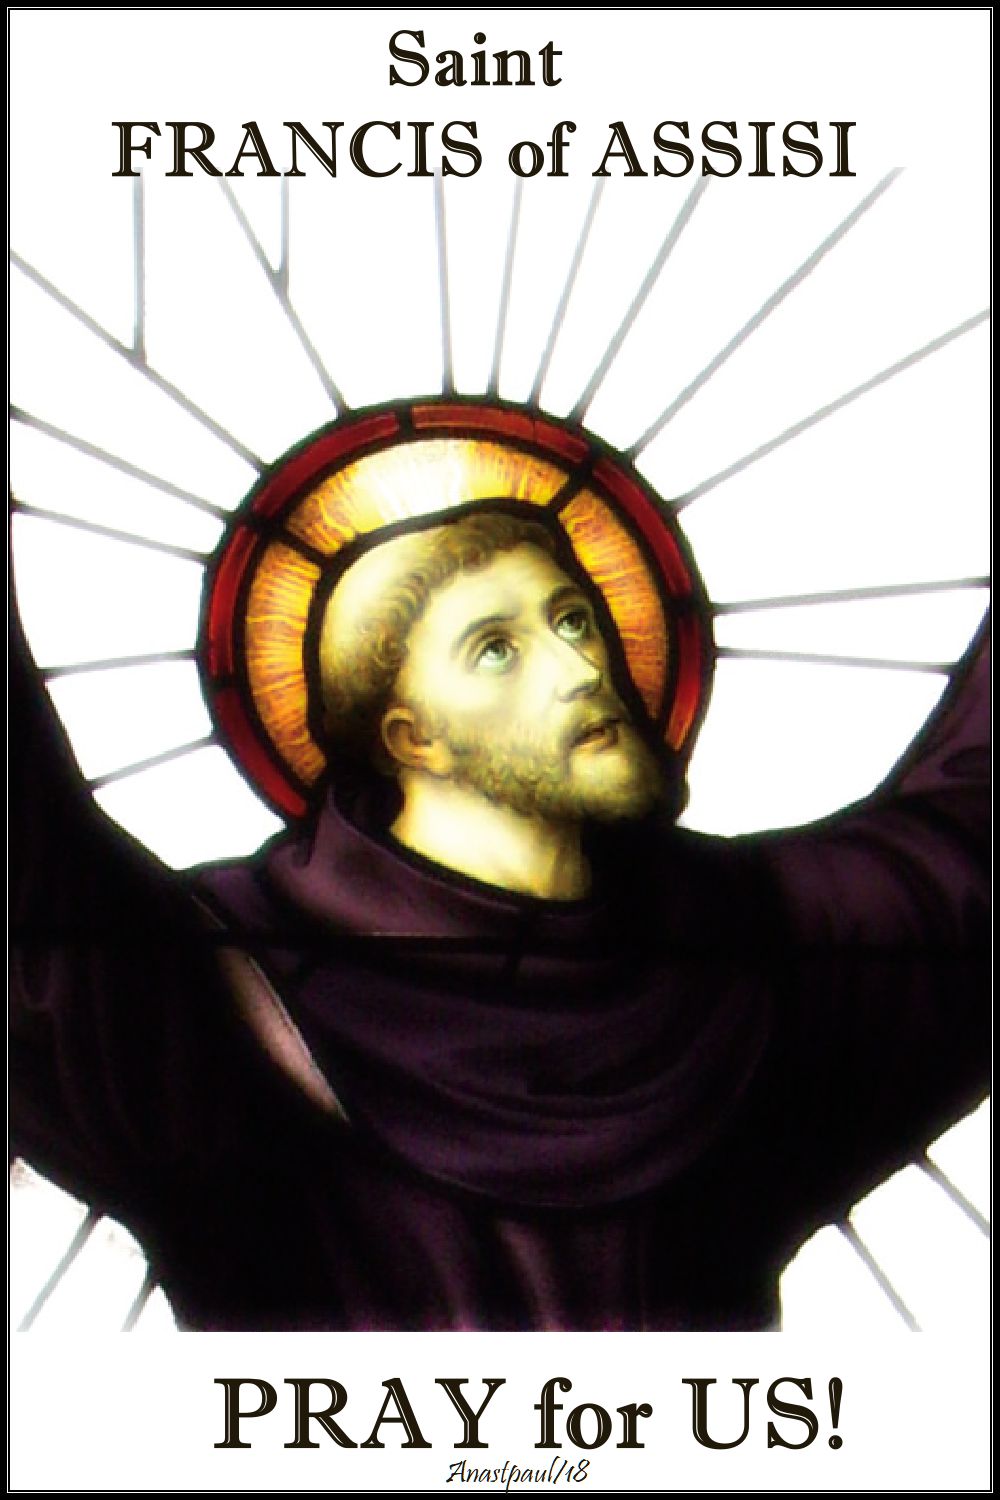 st francis of assisi pray for us - 4 oct 2018